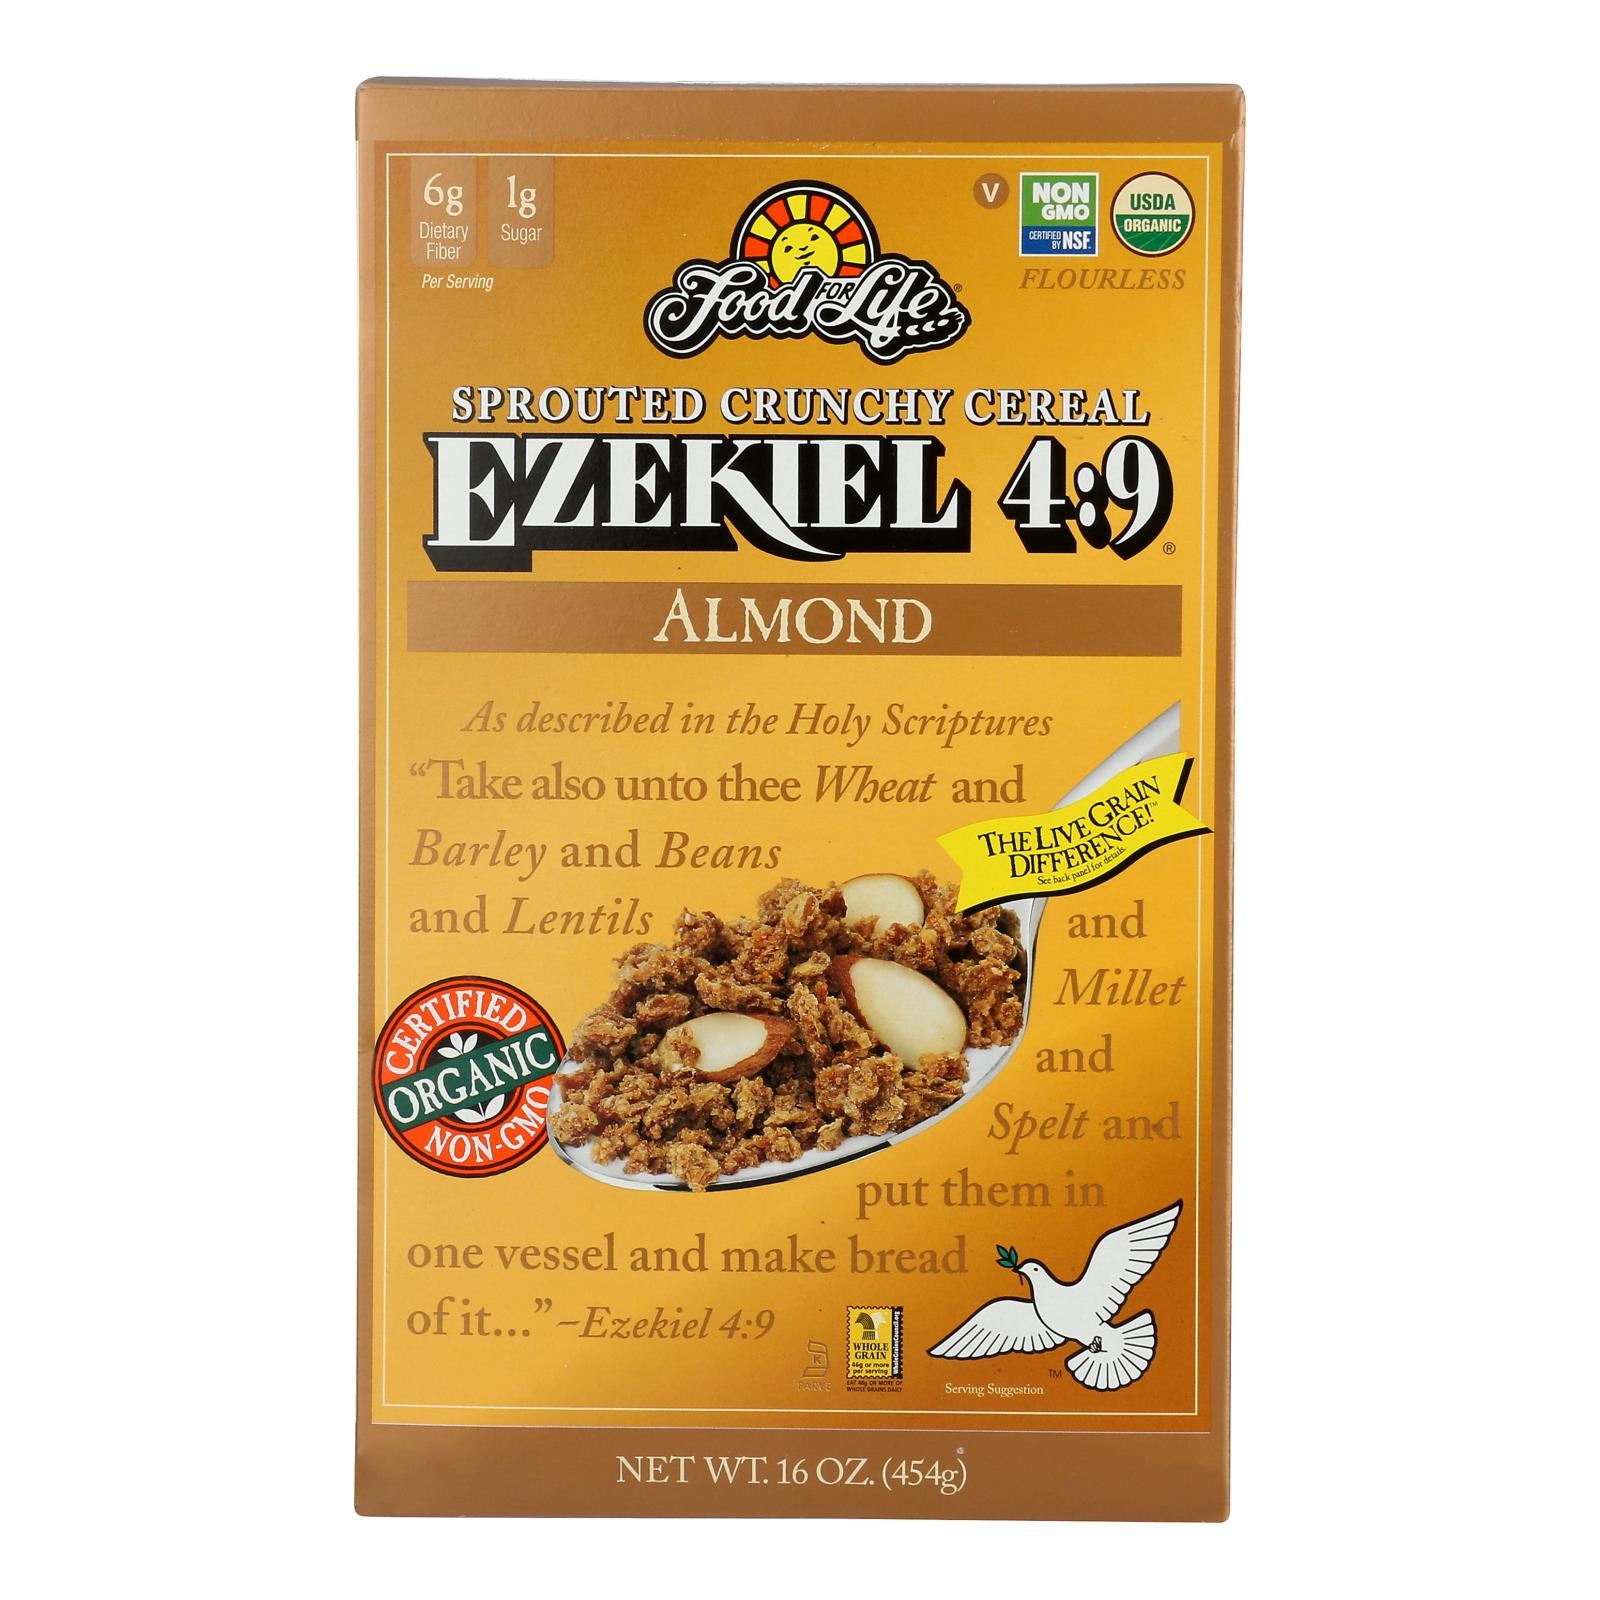 Food For Life Baking Co. Cereal - Organic - Ezekiel 4-9 - Sprouted Whole Grain - Almond - 16 Oz - Case Of 6